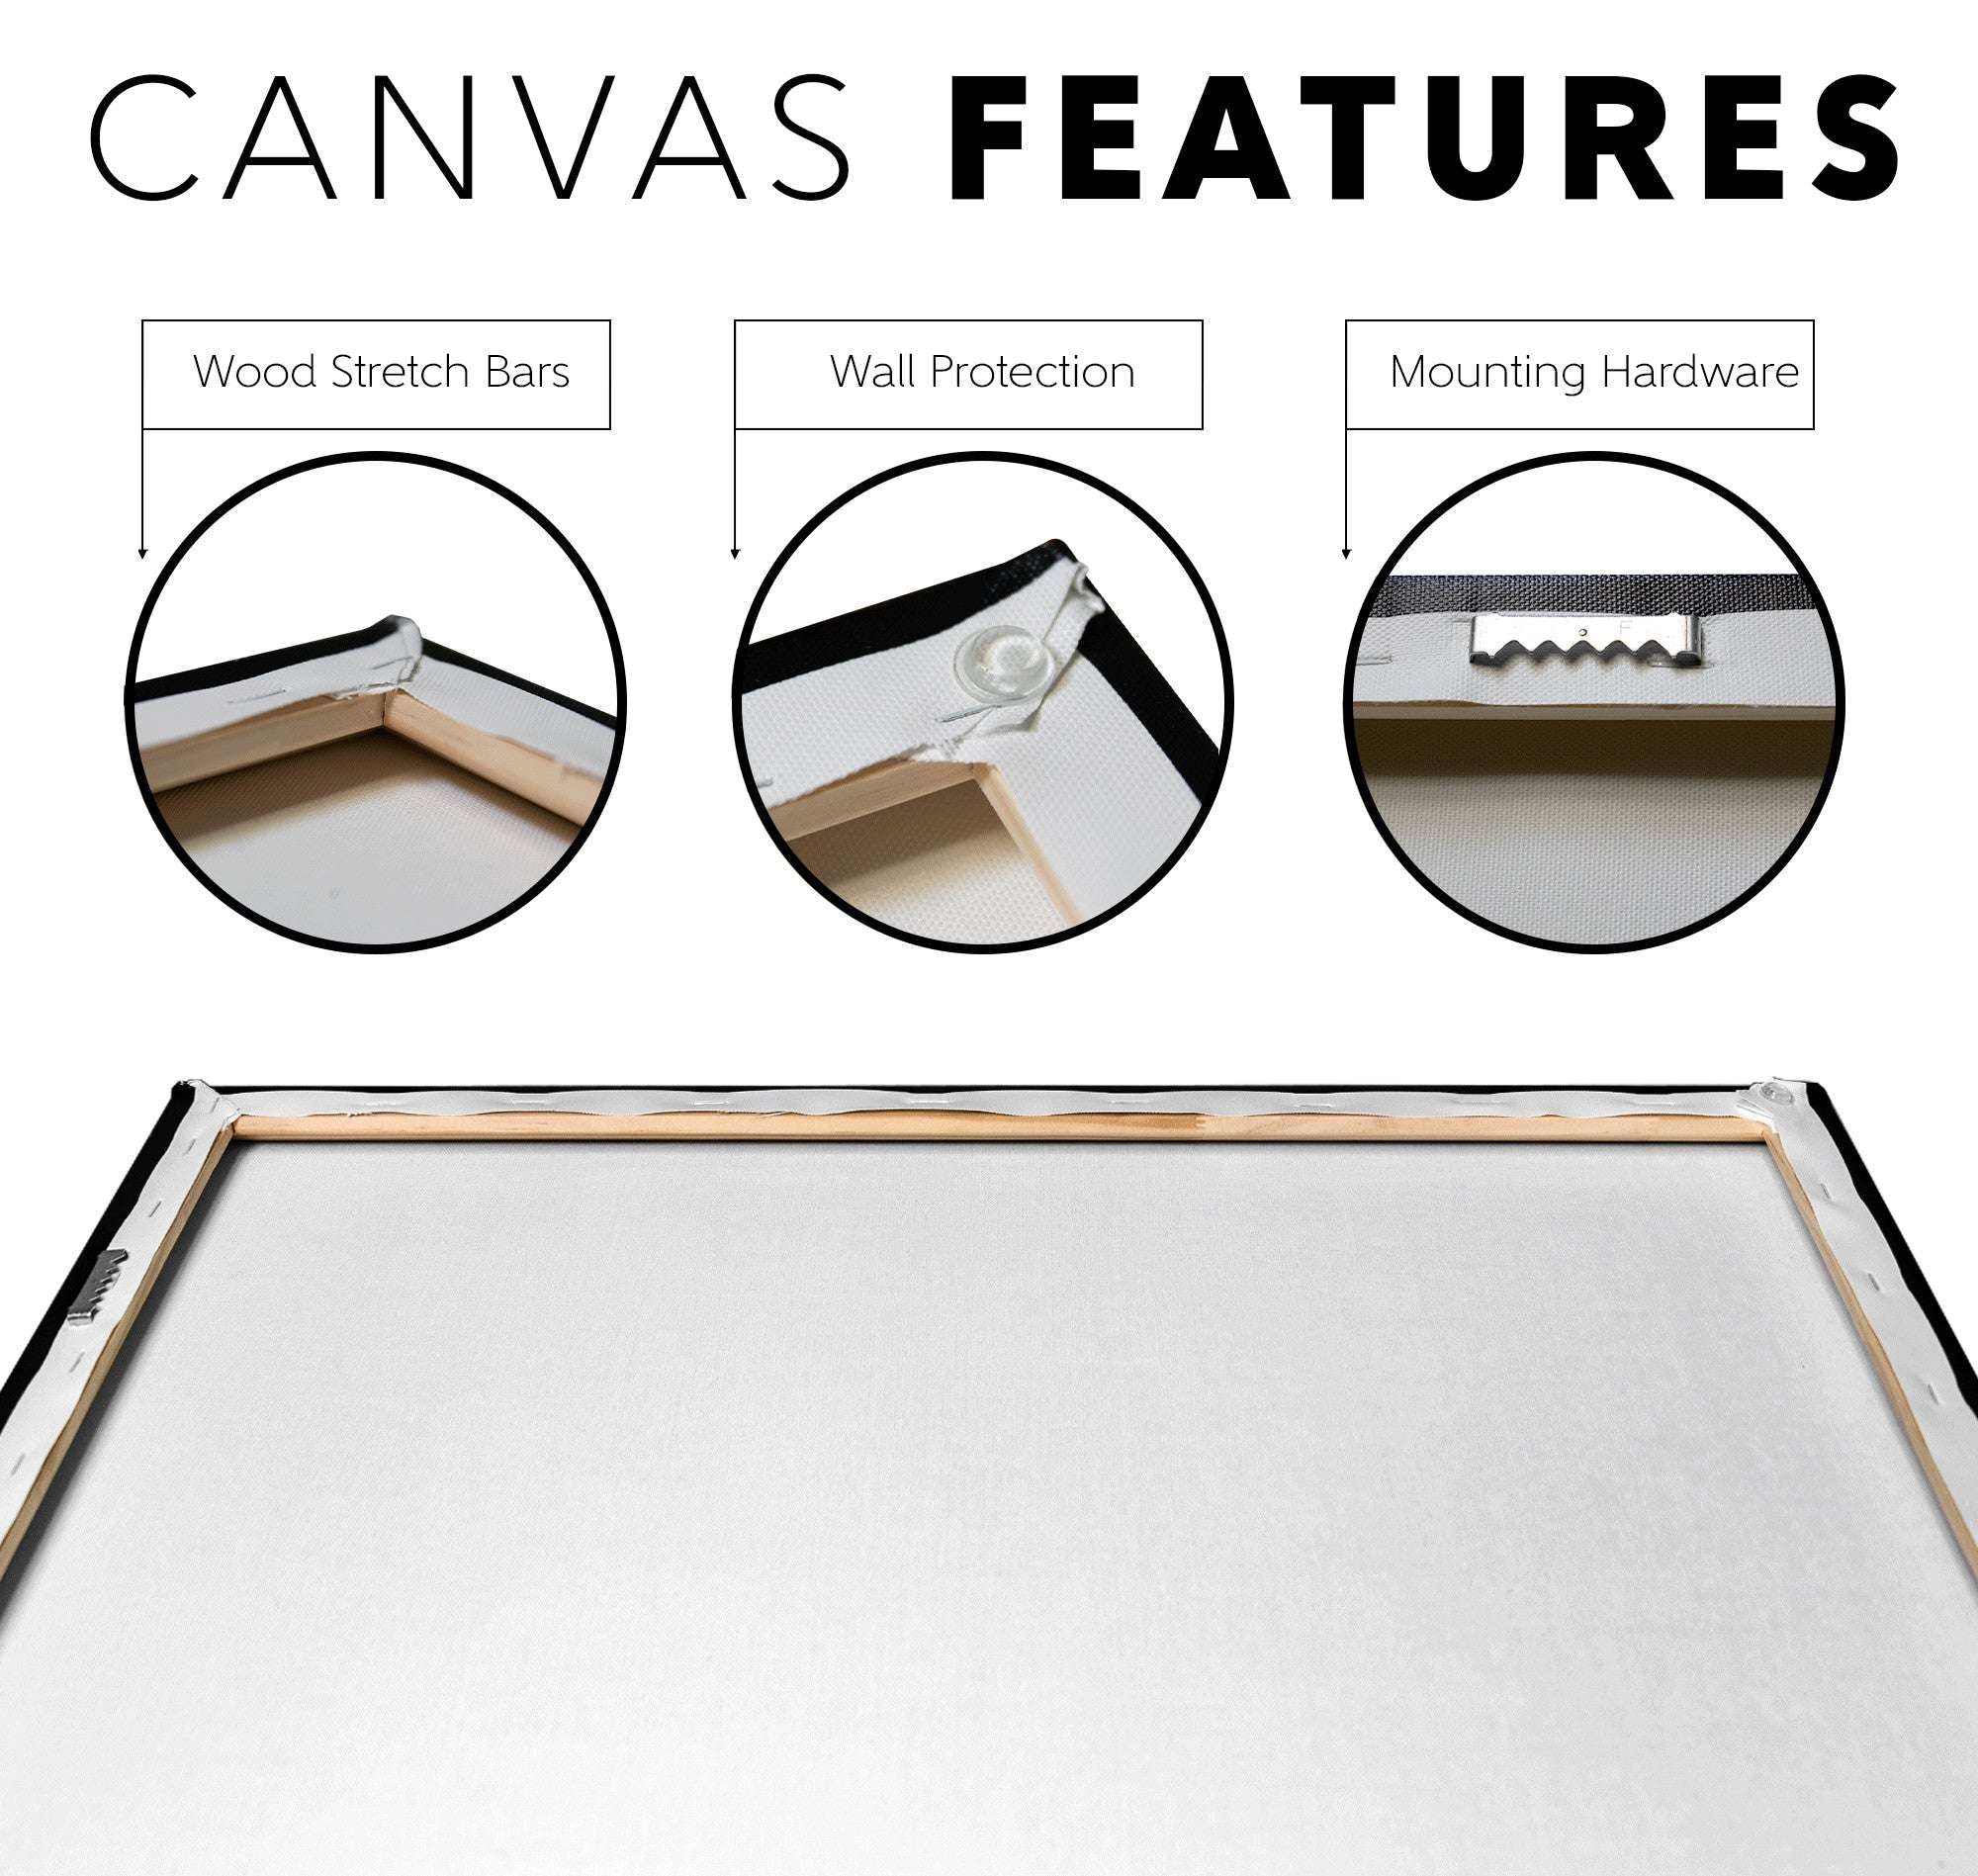 Infographic showing features of a Canvas Wolf Print, including wood stretch bars, wall protection, and mounting hardware, with close-up images and a view of the back of the canvas.